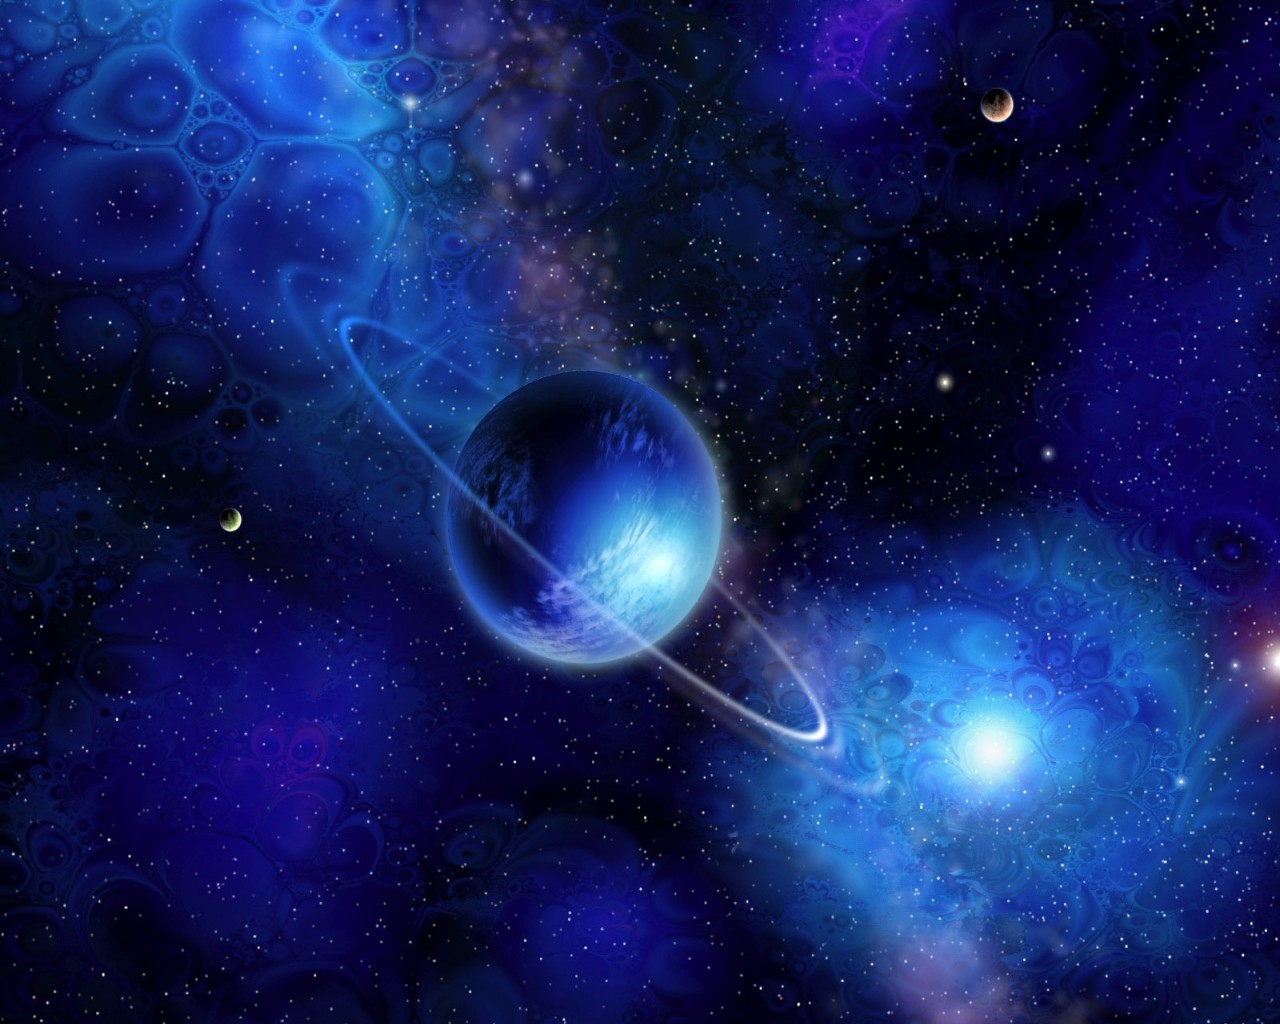 Blue Galaxies With Planets - HD Wallpaper 